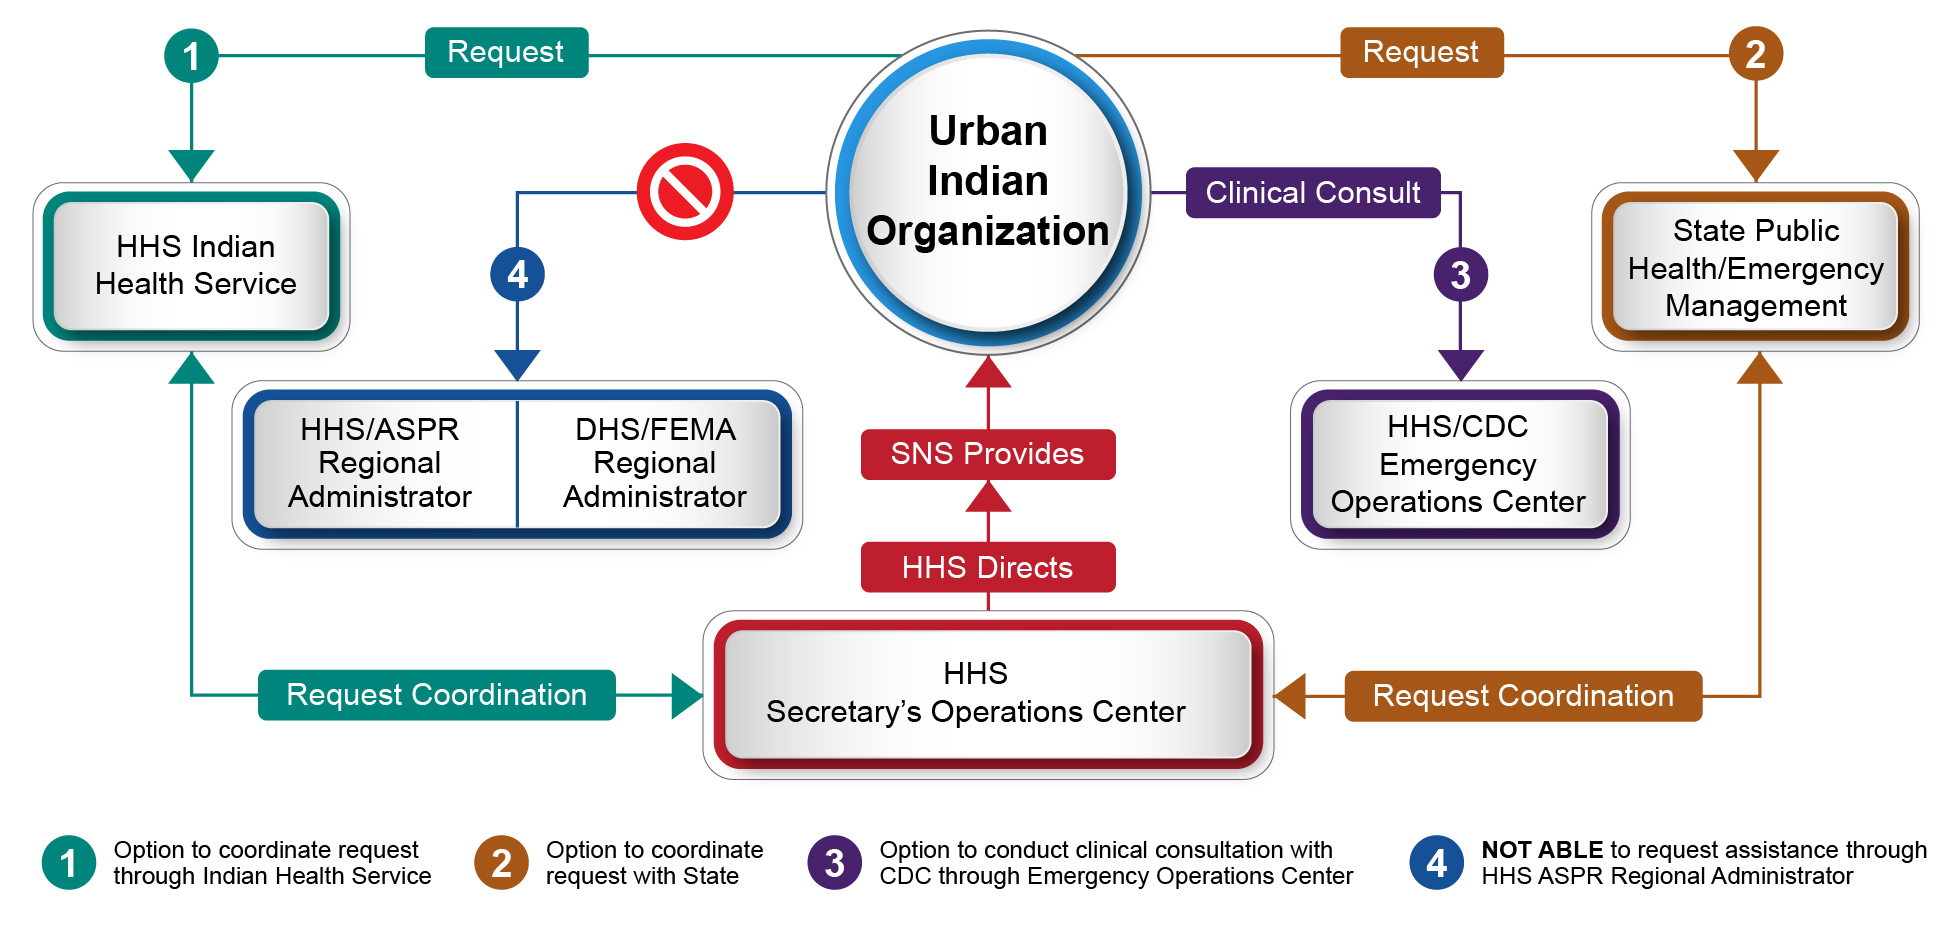 The flow chart shows the recommended pathways for Urban Indian Organization to Requests for SNS support.